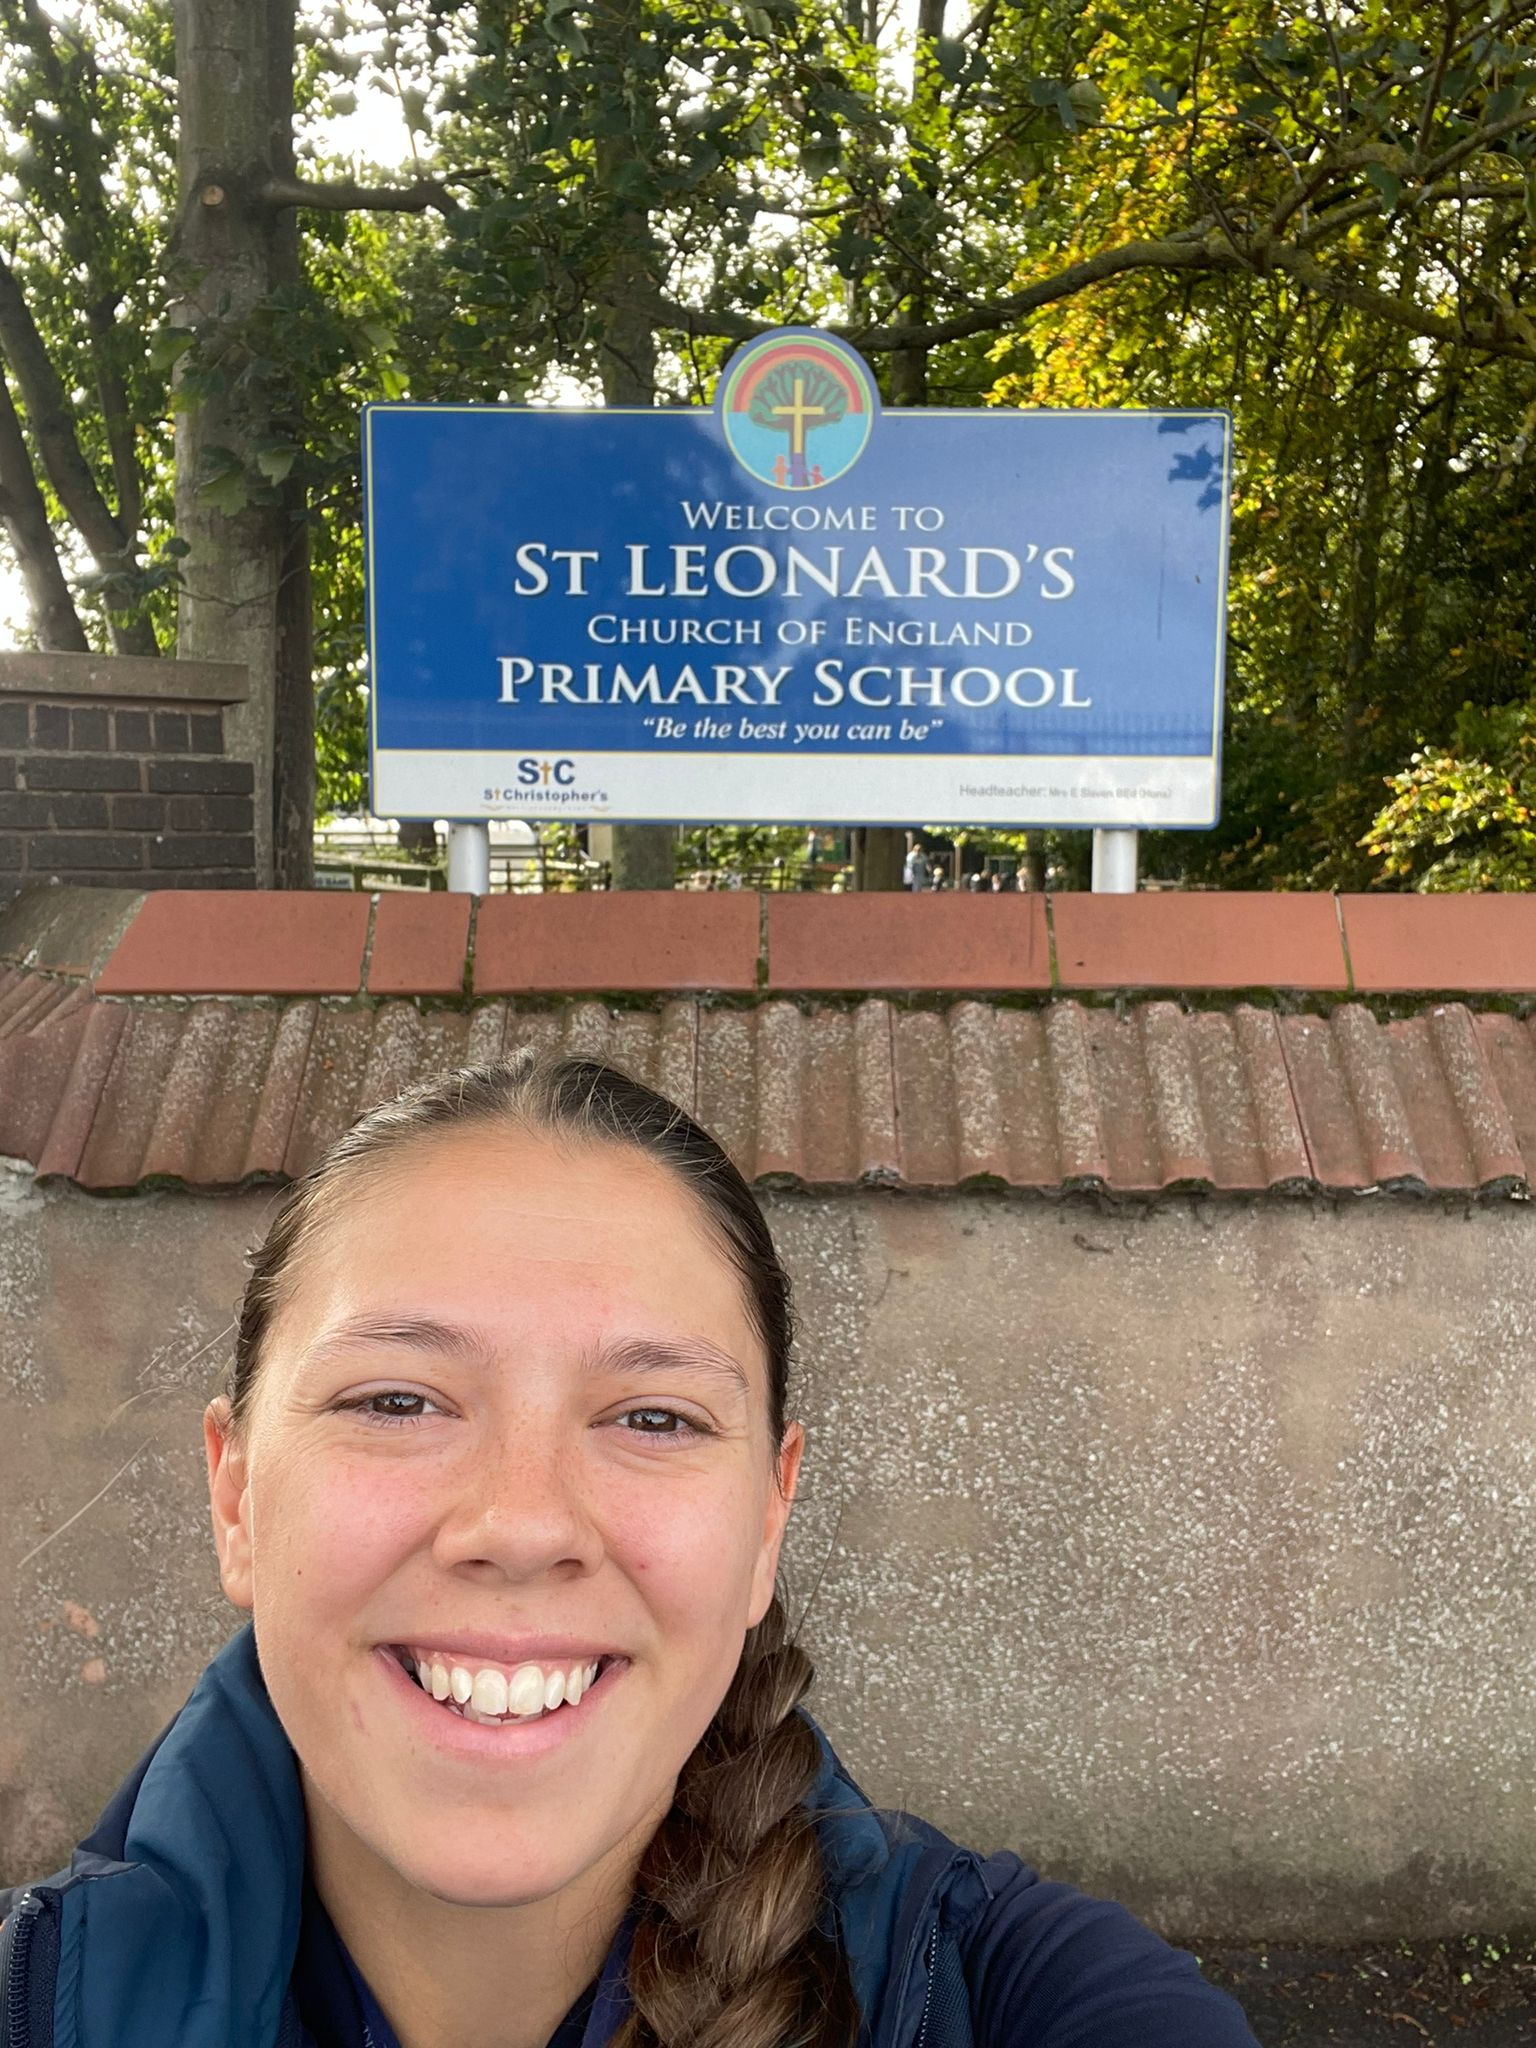 Bronwyn smiling in front of a sign for St Leonard's Primary School